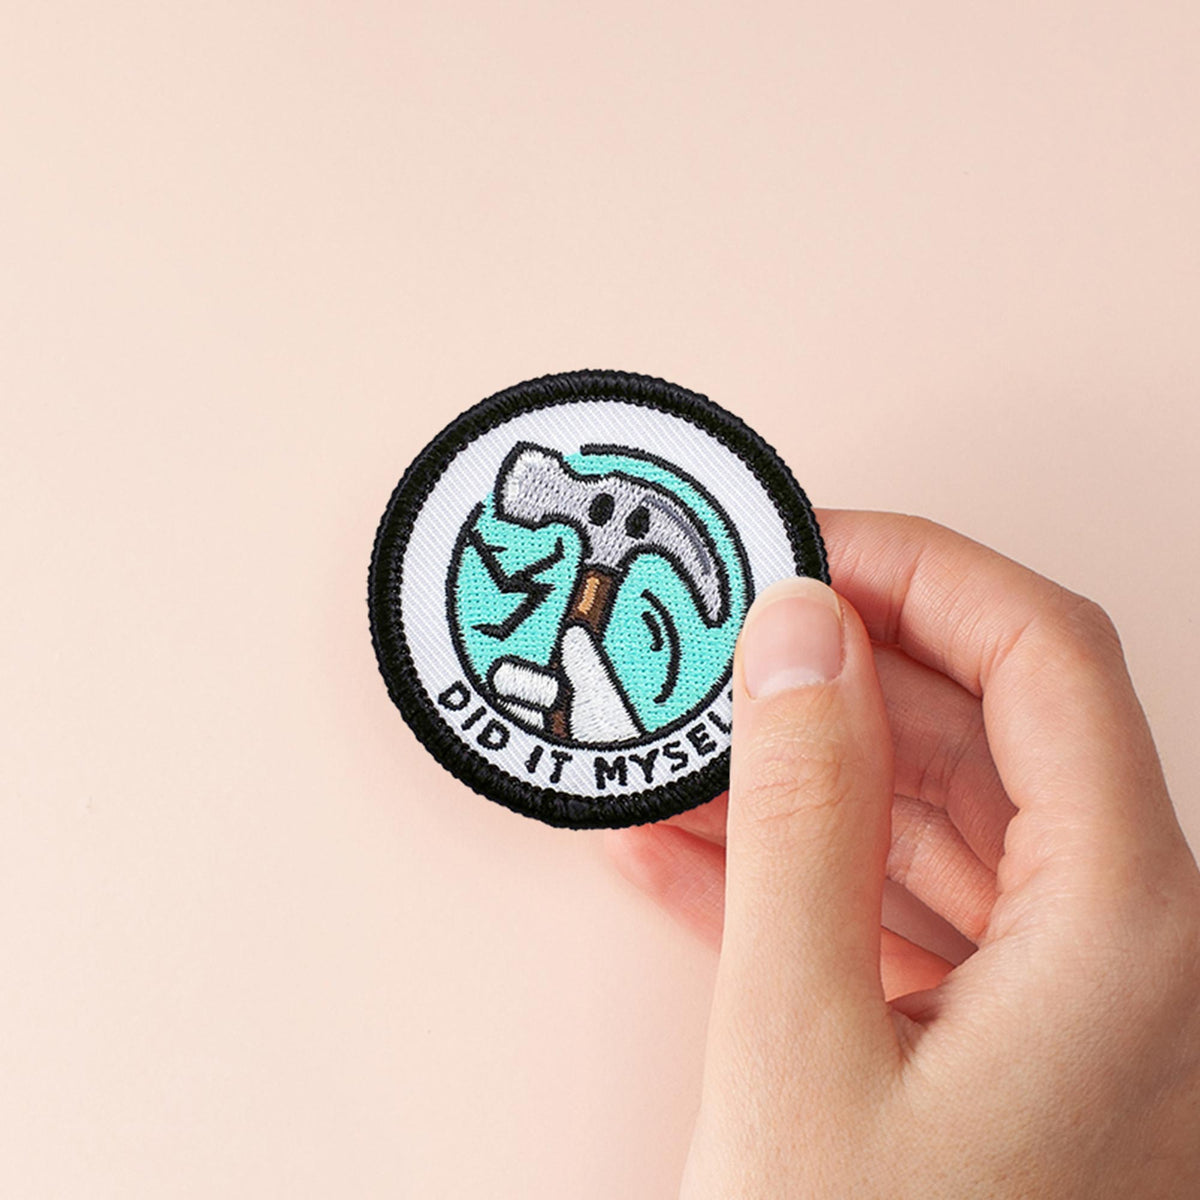 Did It Myself adulting merit badge patch for adults